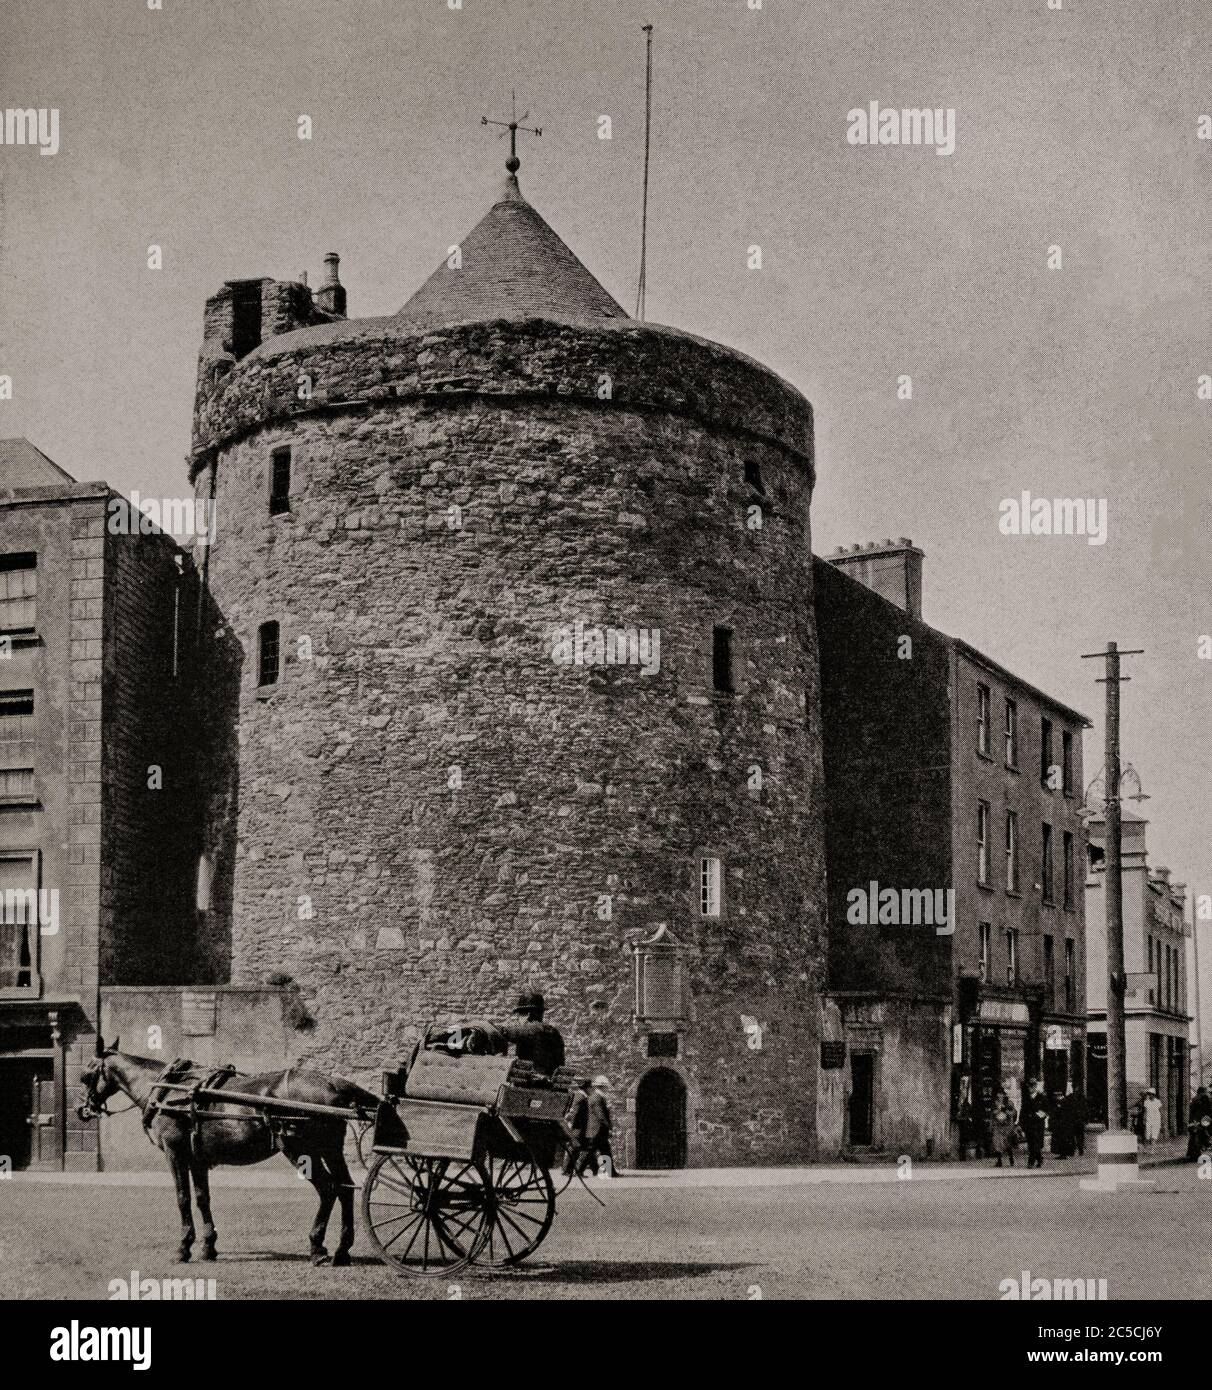 An early 1920's view of a pony and trap riding past Reginald's Tower in Waterford City. Built by the Anglo-Normans to replace an earlier Viking fortification, when Prince John of England landed in Waterford and organised the rebuilding of the city's defences, including the tower between 1253 and 1280. Originally photographed by Clifton Adams (1890-1934) for 'Ireland: The Rock Whence I Was Hewn', a National Geographic Magazine feature from March 1927. Stock Photo